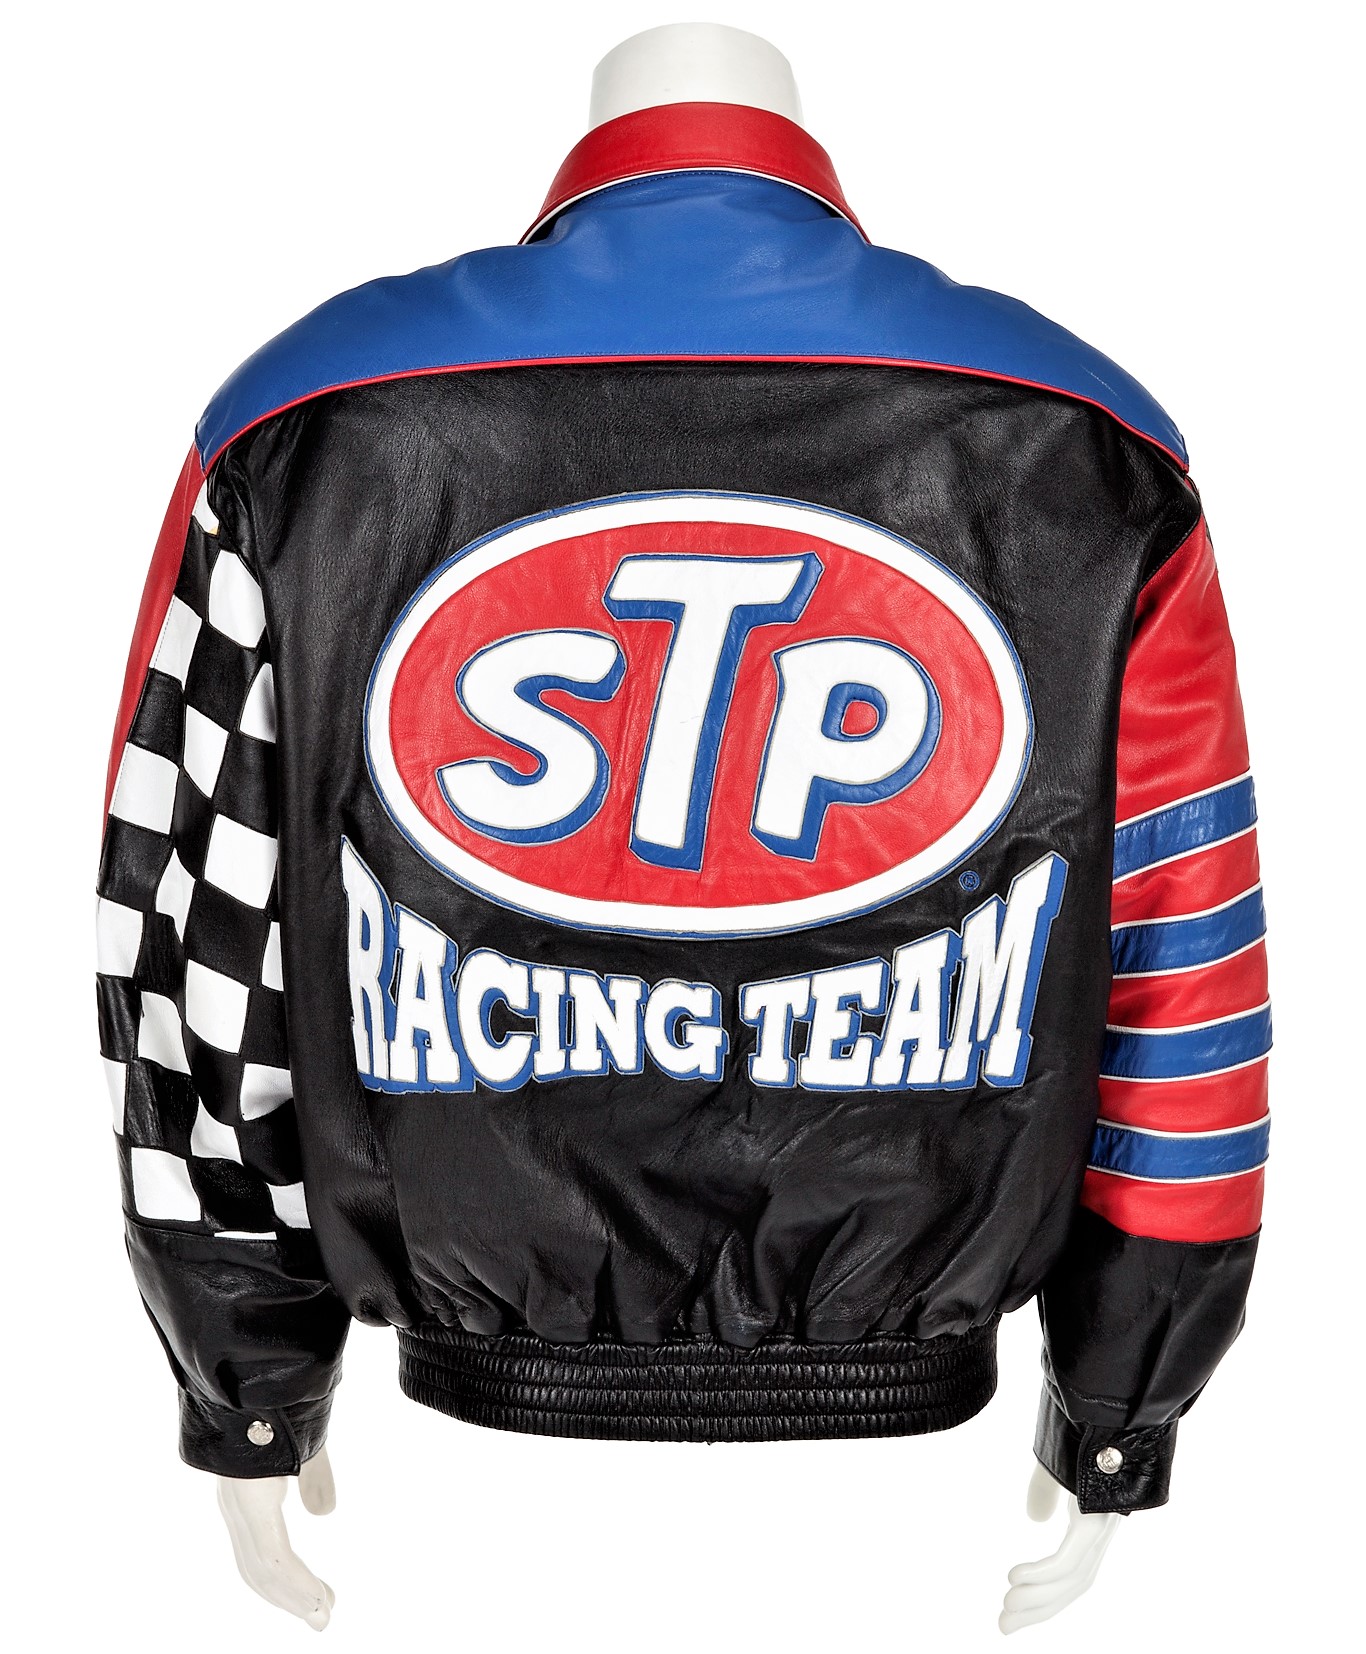 NASCAR great Richard Petty’s collection to be auctioned | ClassicCars